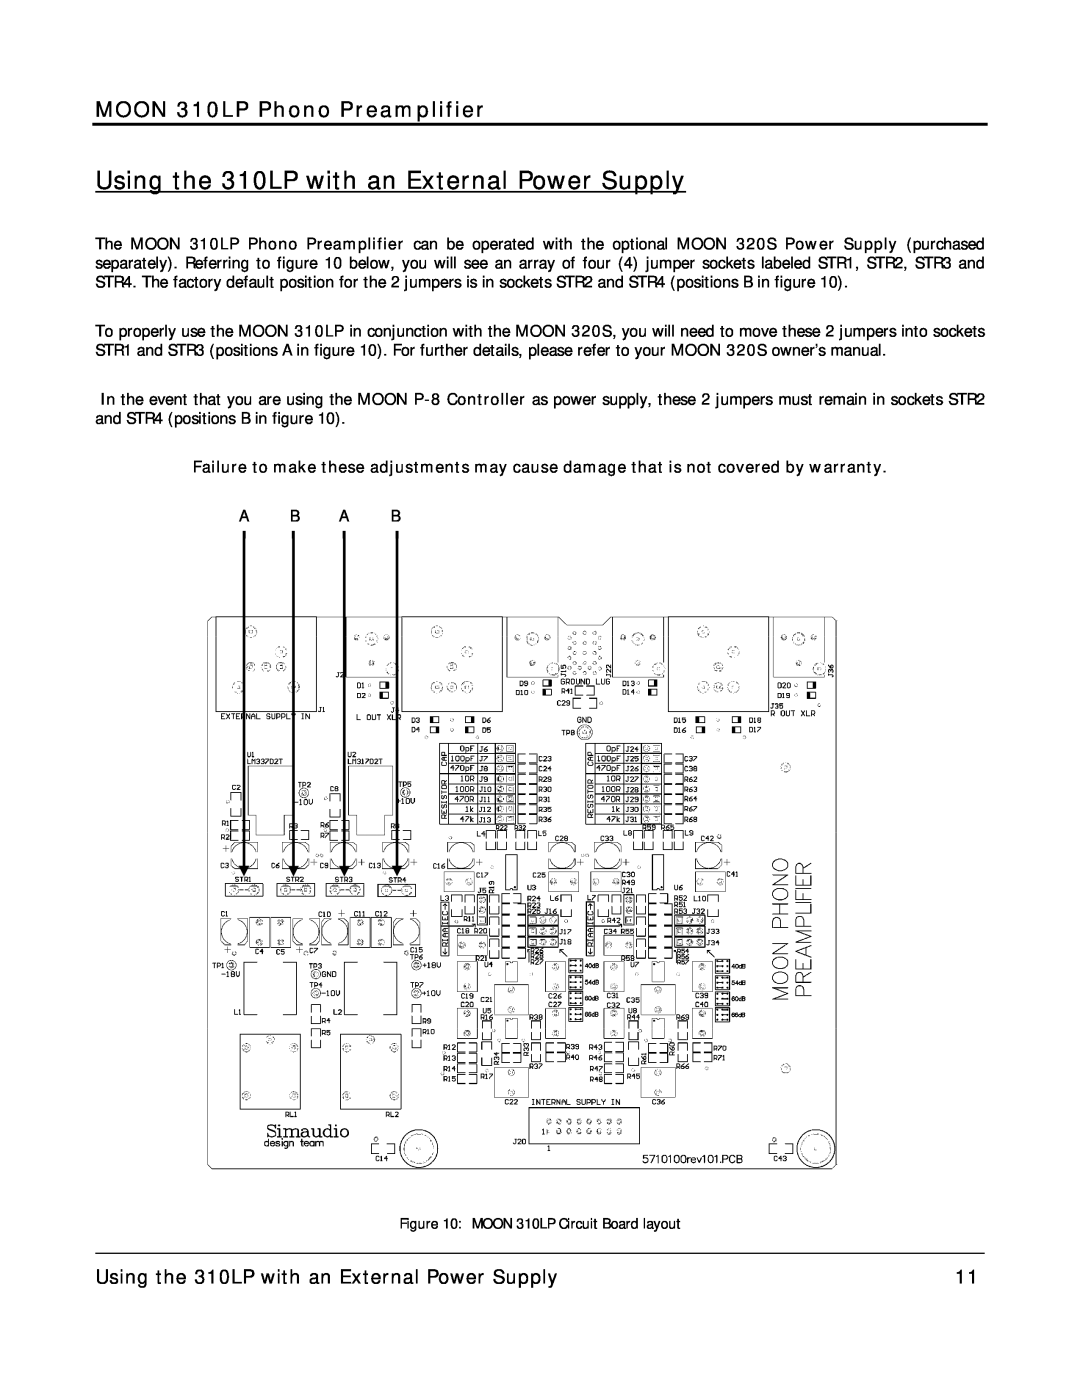 Simaudio 310 LP owner manual Using the 310LP with an External Power Supply, MOON 310LP Phono Preamplifier 